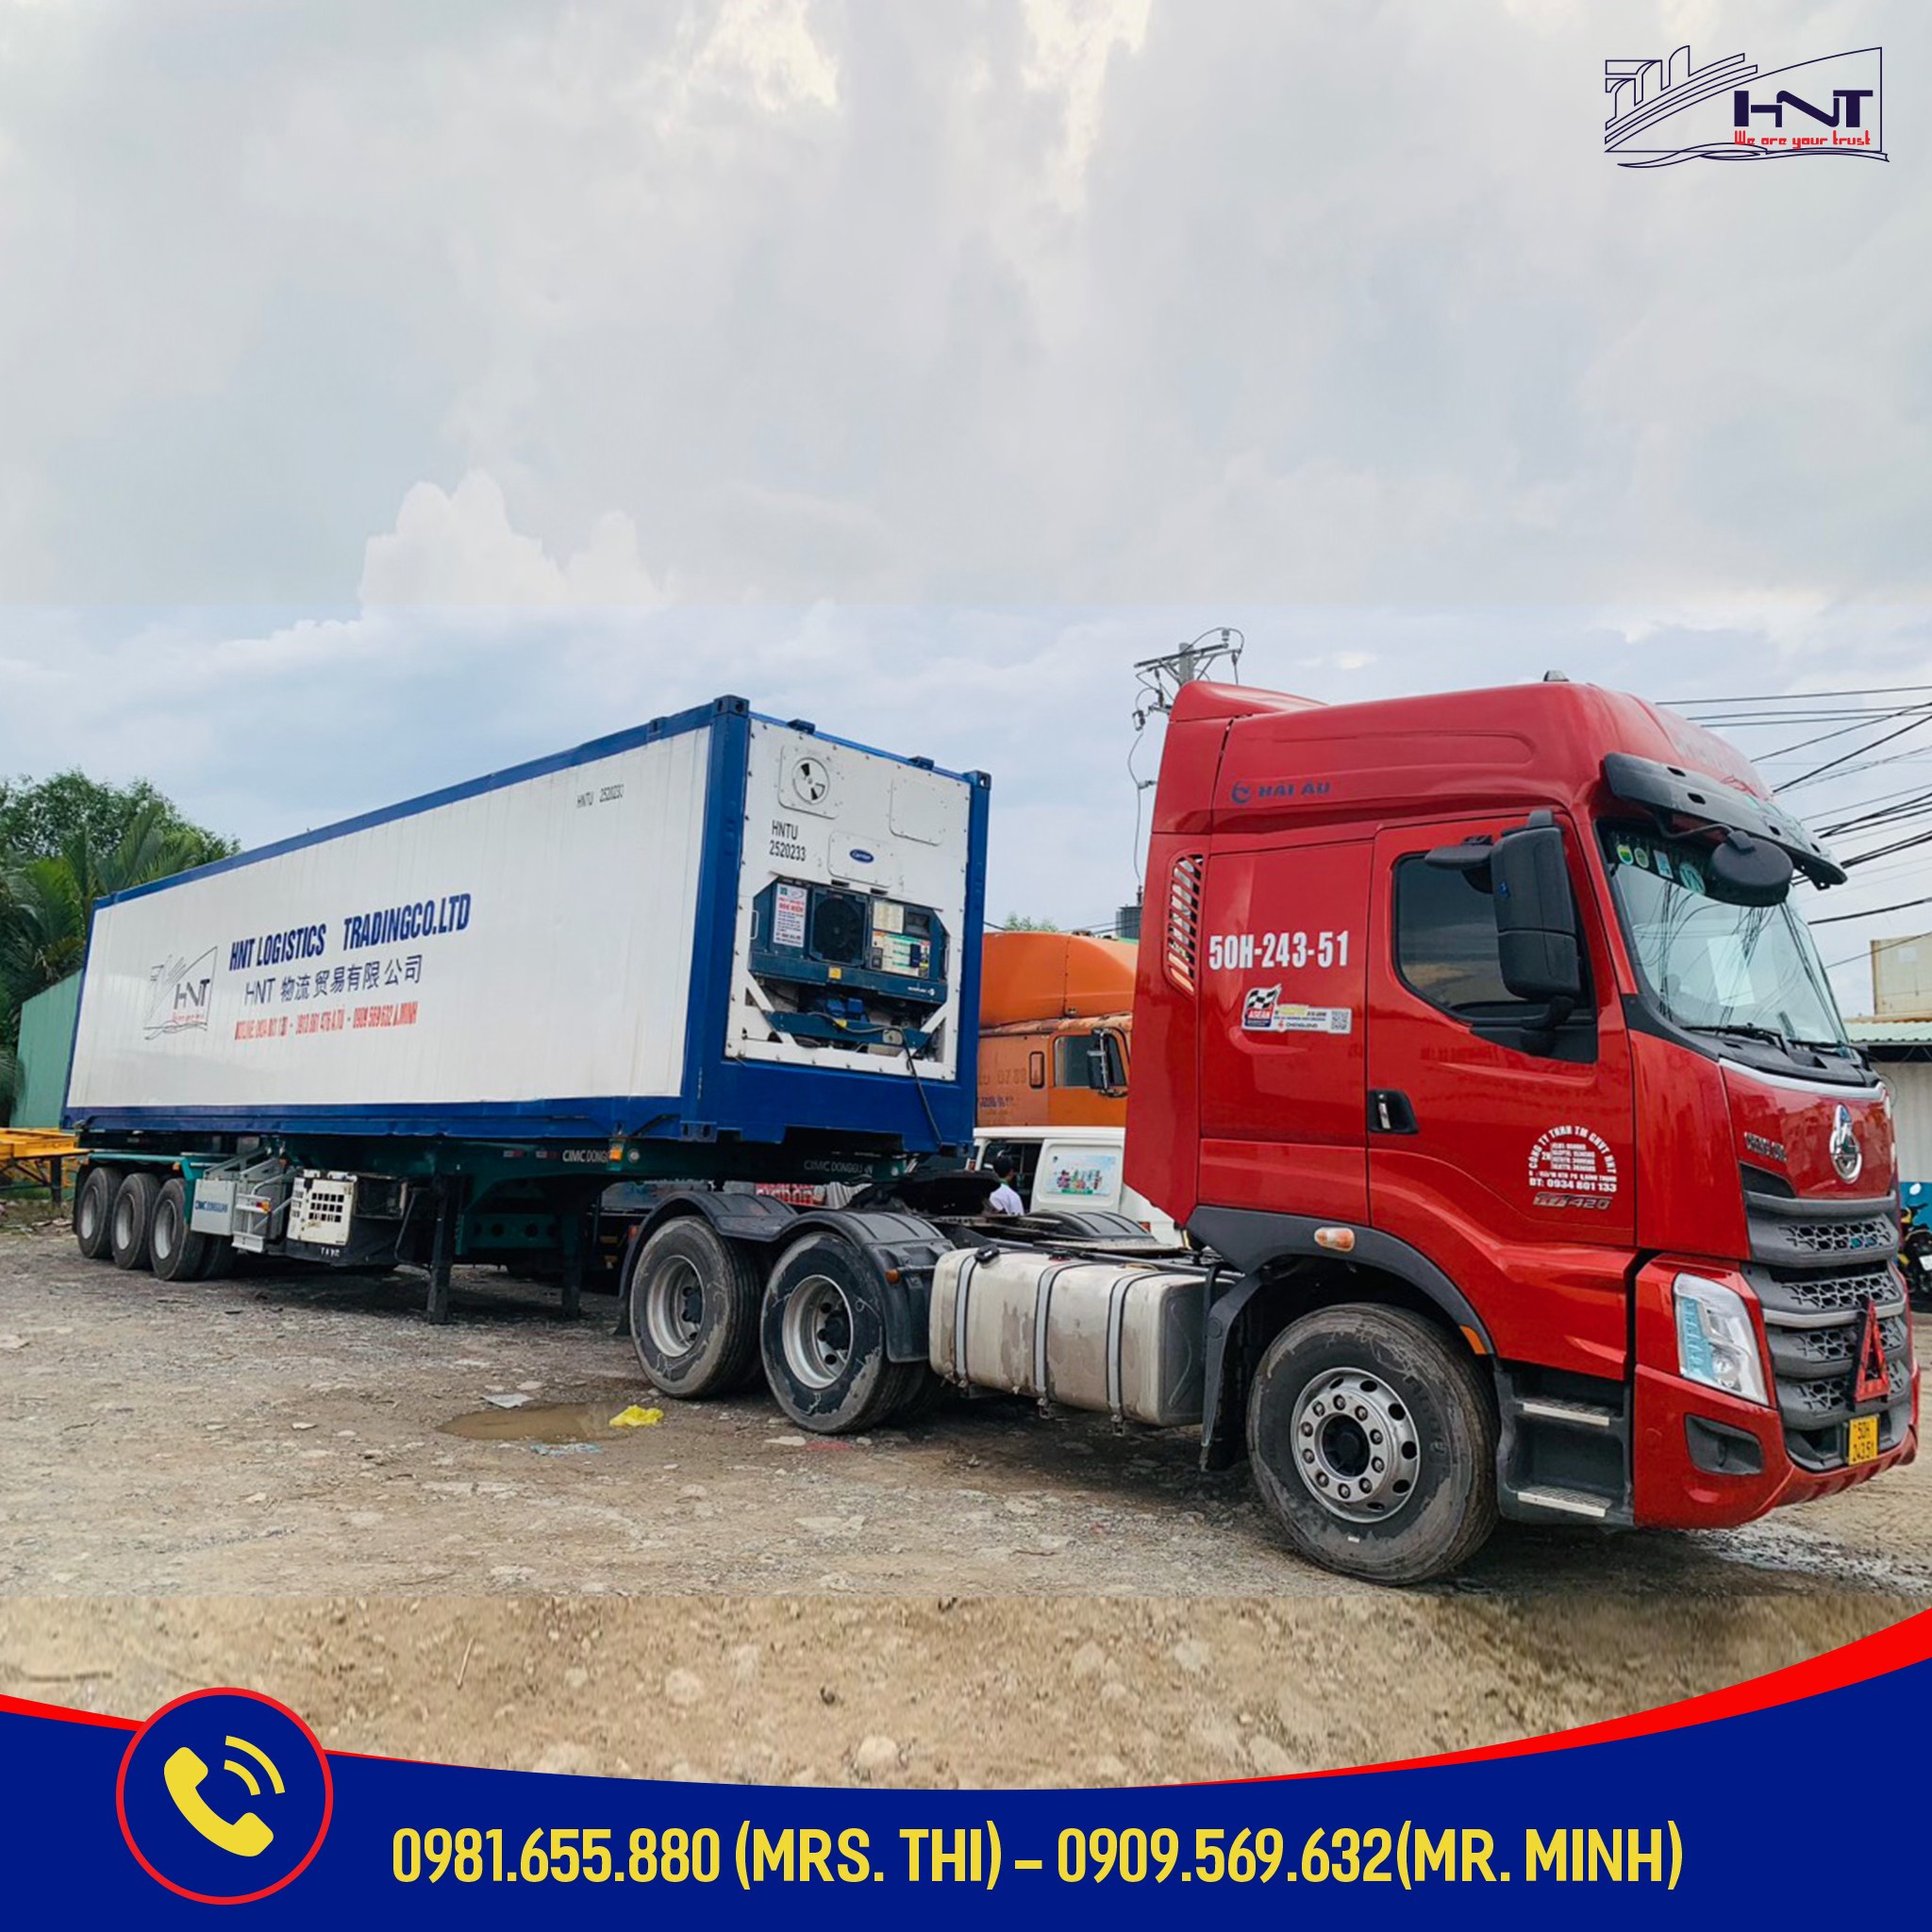 HNT Company belonging to the top of the field of freight forwarding in Ho Chi Minh city